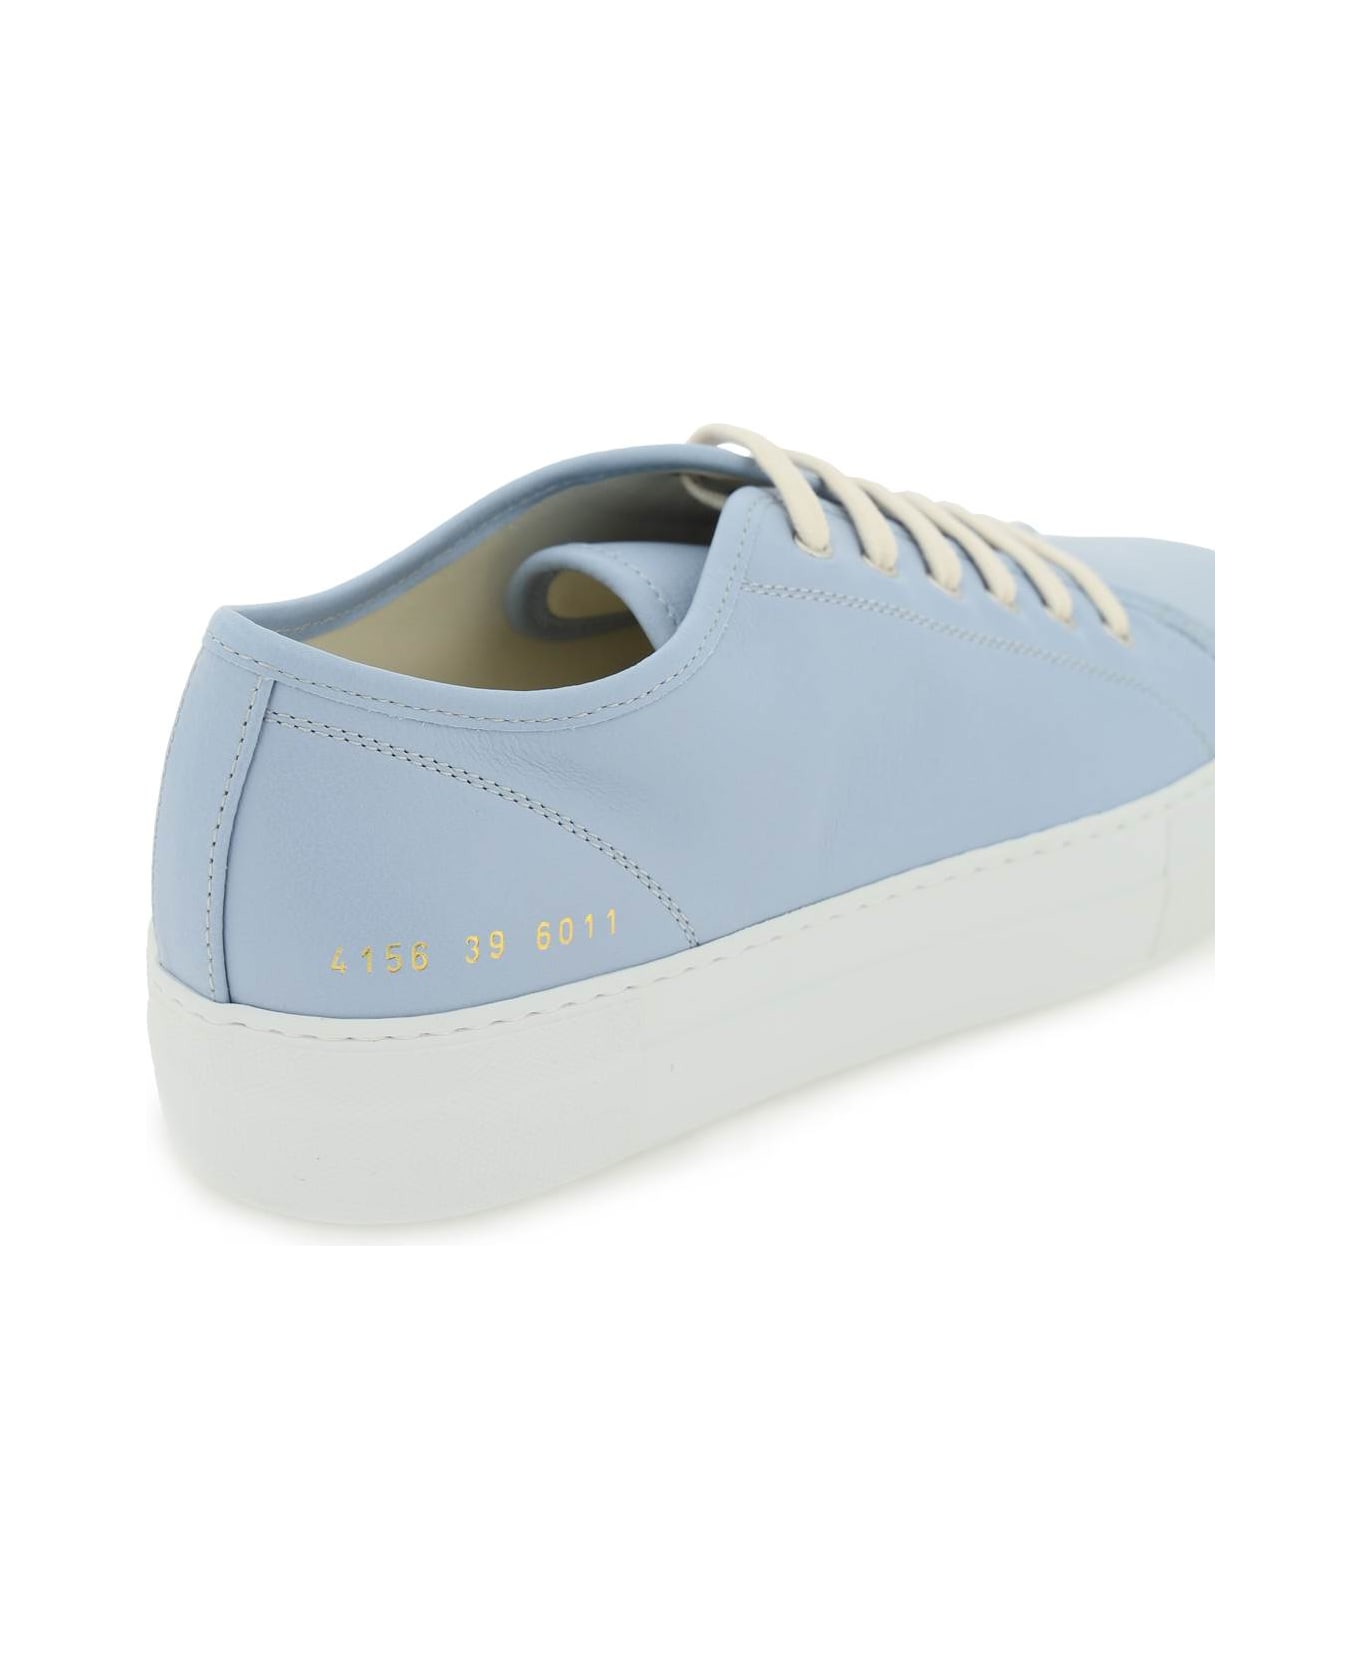 Common Projects Leather Tournament Low Super Sneakers - BABY BLUE (Light blue)